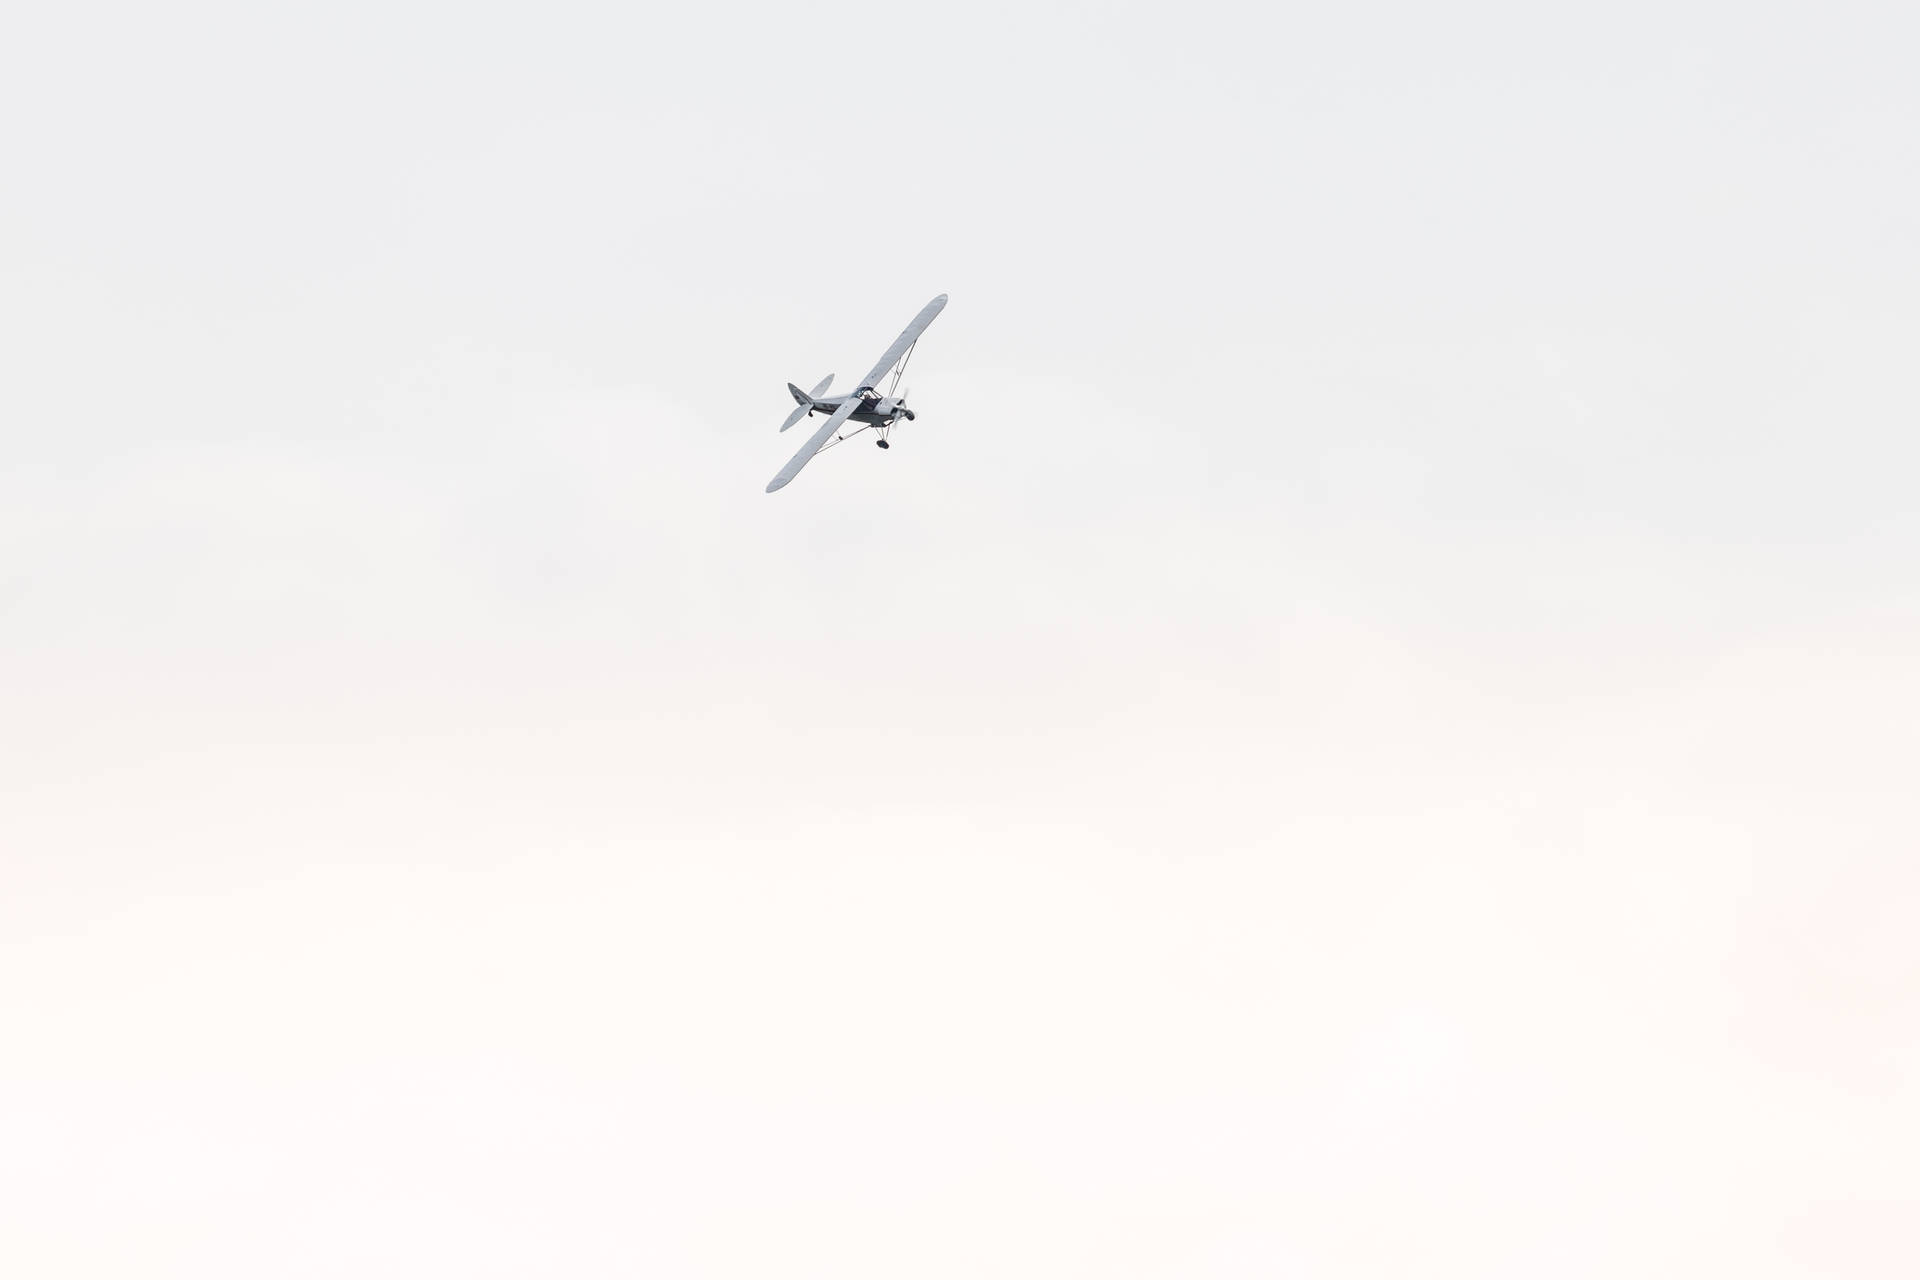 Flying Small Plane Background